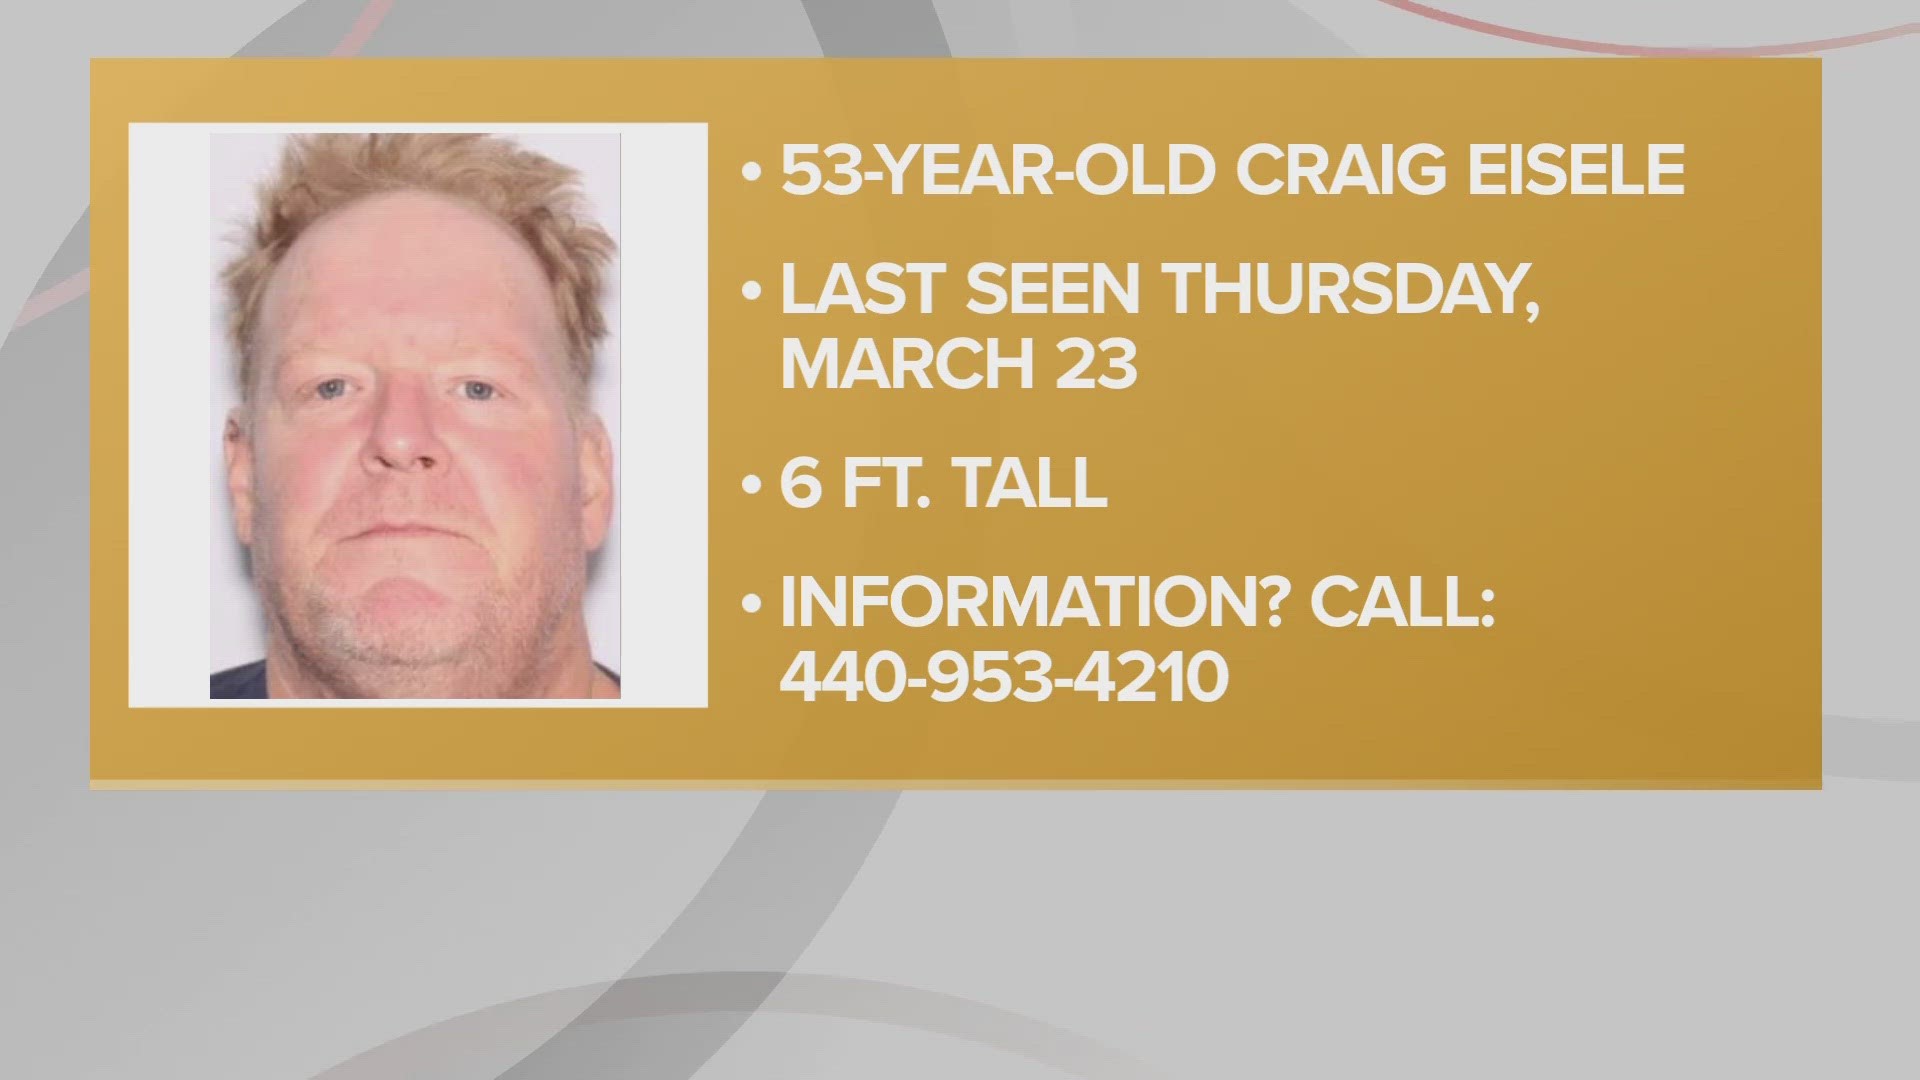 Anyone with information on the missing man is asked to call 440-953-4210.